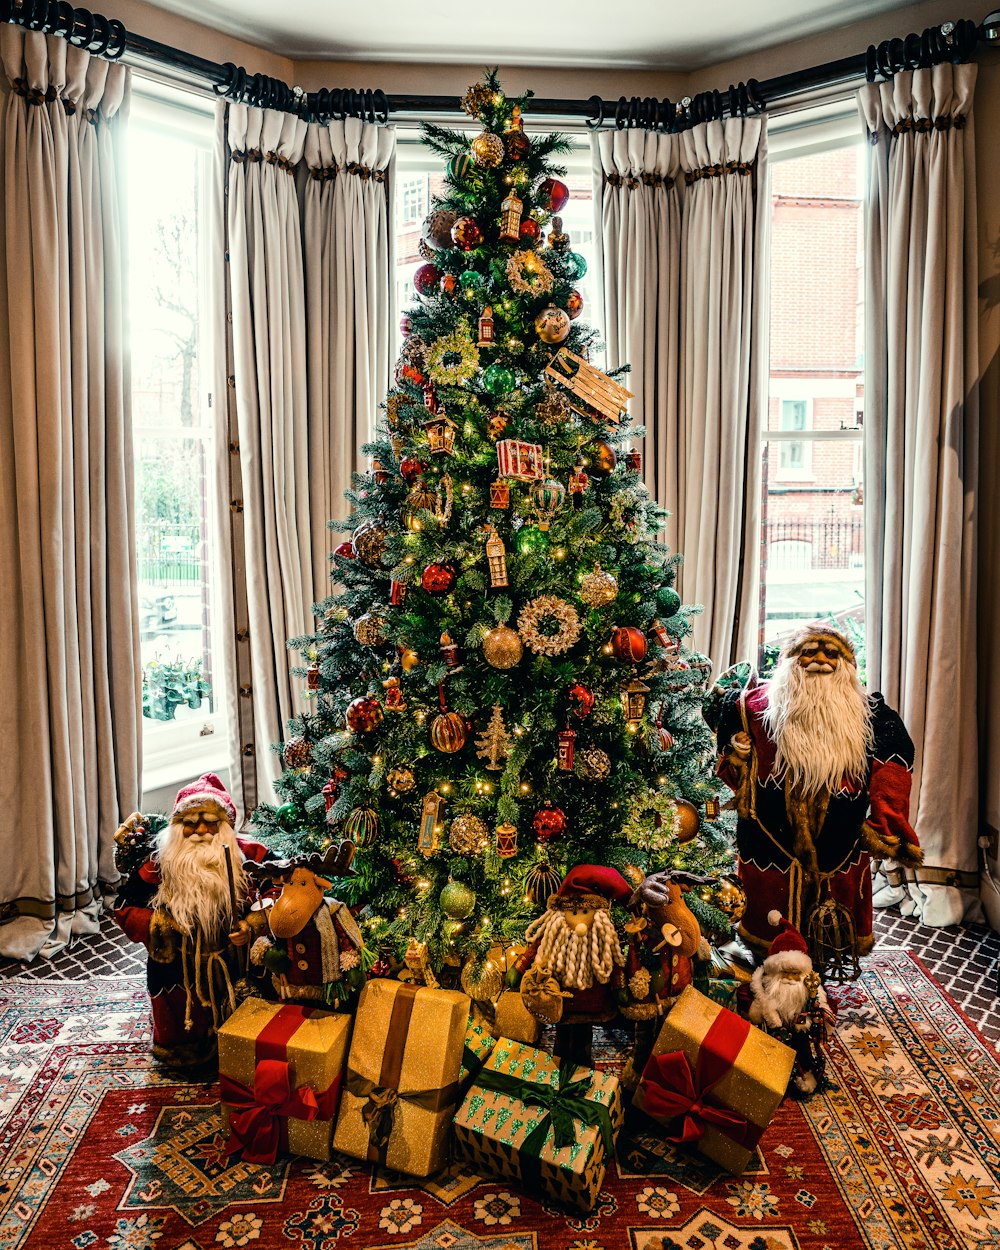 30 000 Xmas Tree Pictures Download Free Images On Unsplash